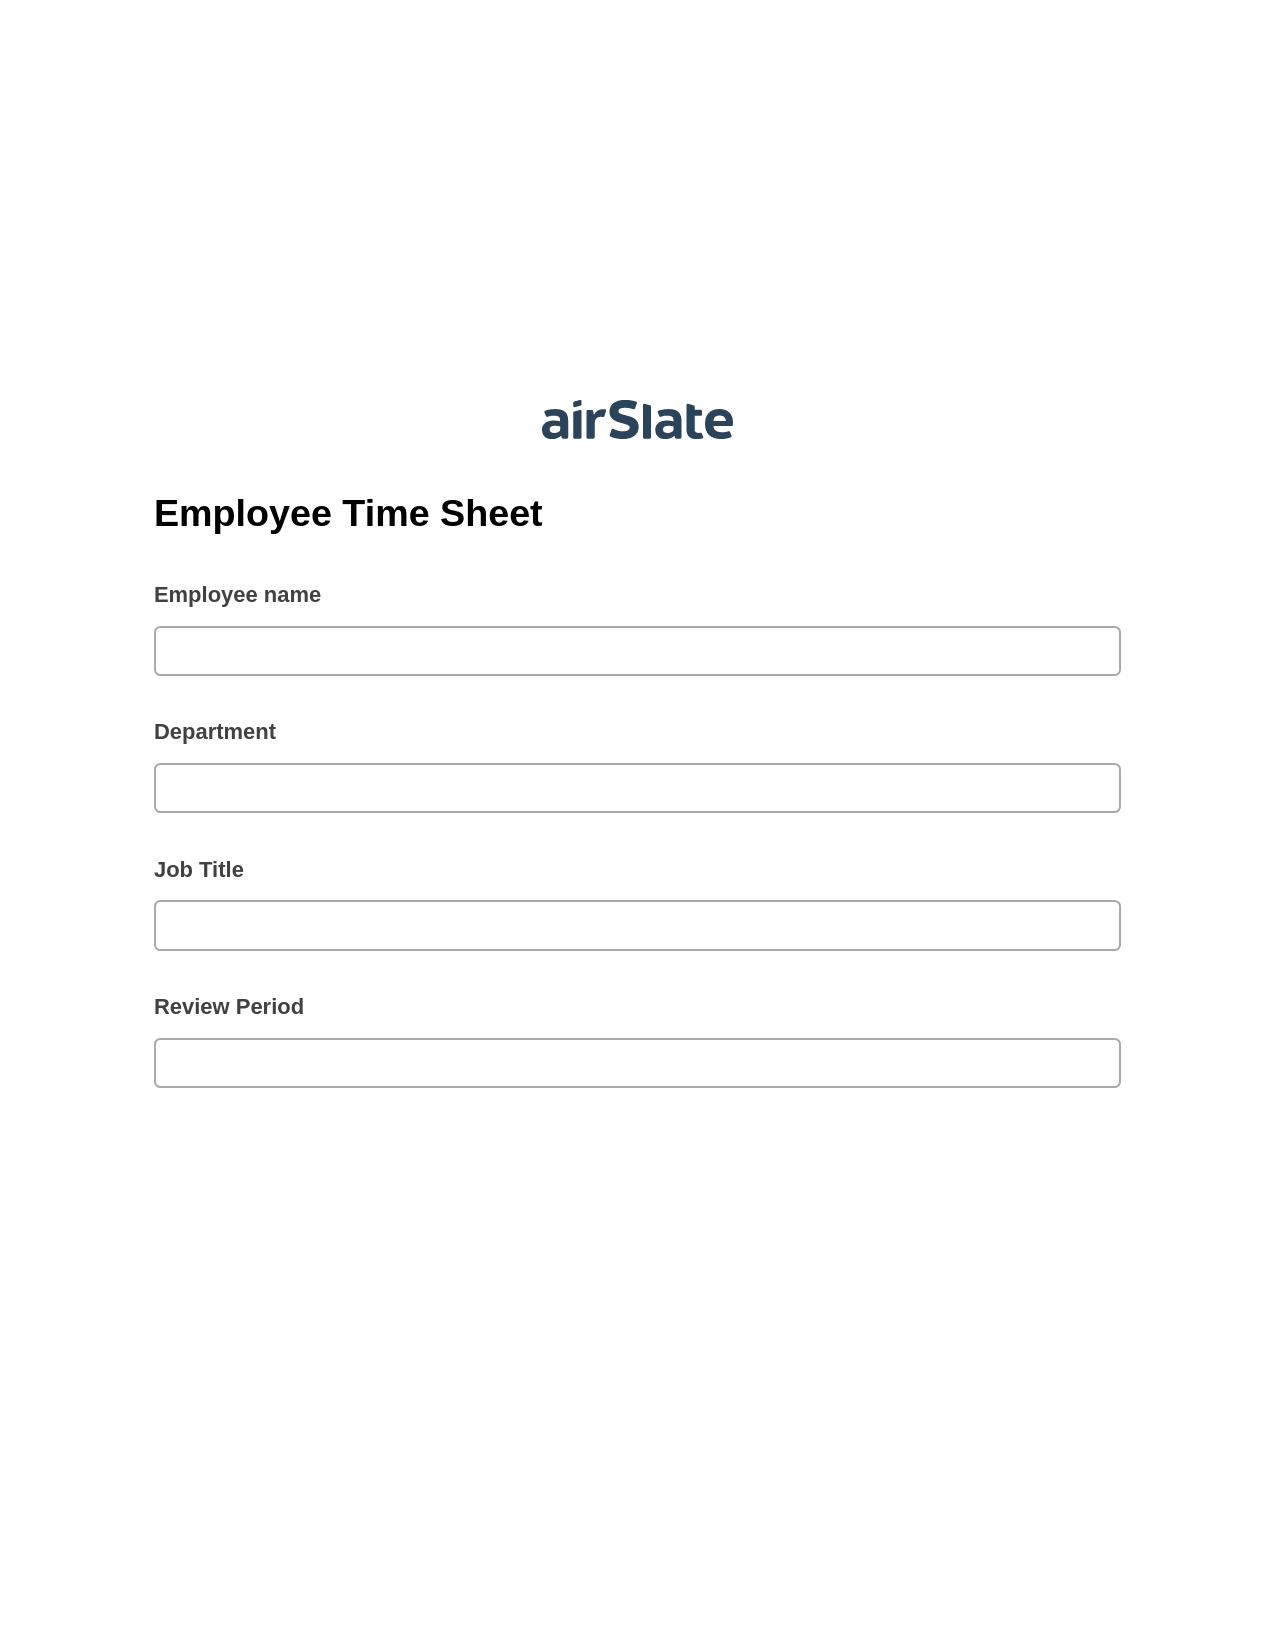 Employee Time Sheet Pre-fill Dropdowns from Excel Bot, Create slate addon, Export to MySQL Bot